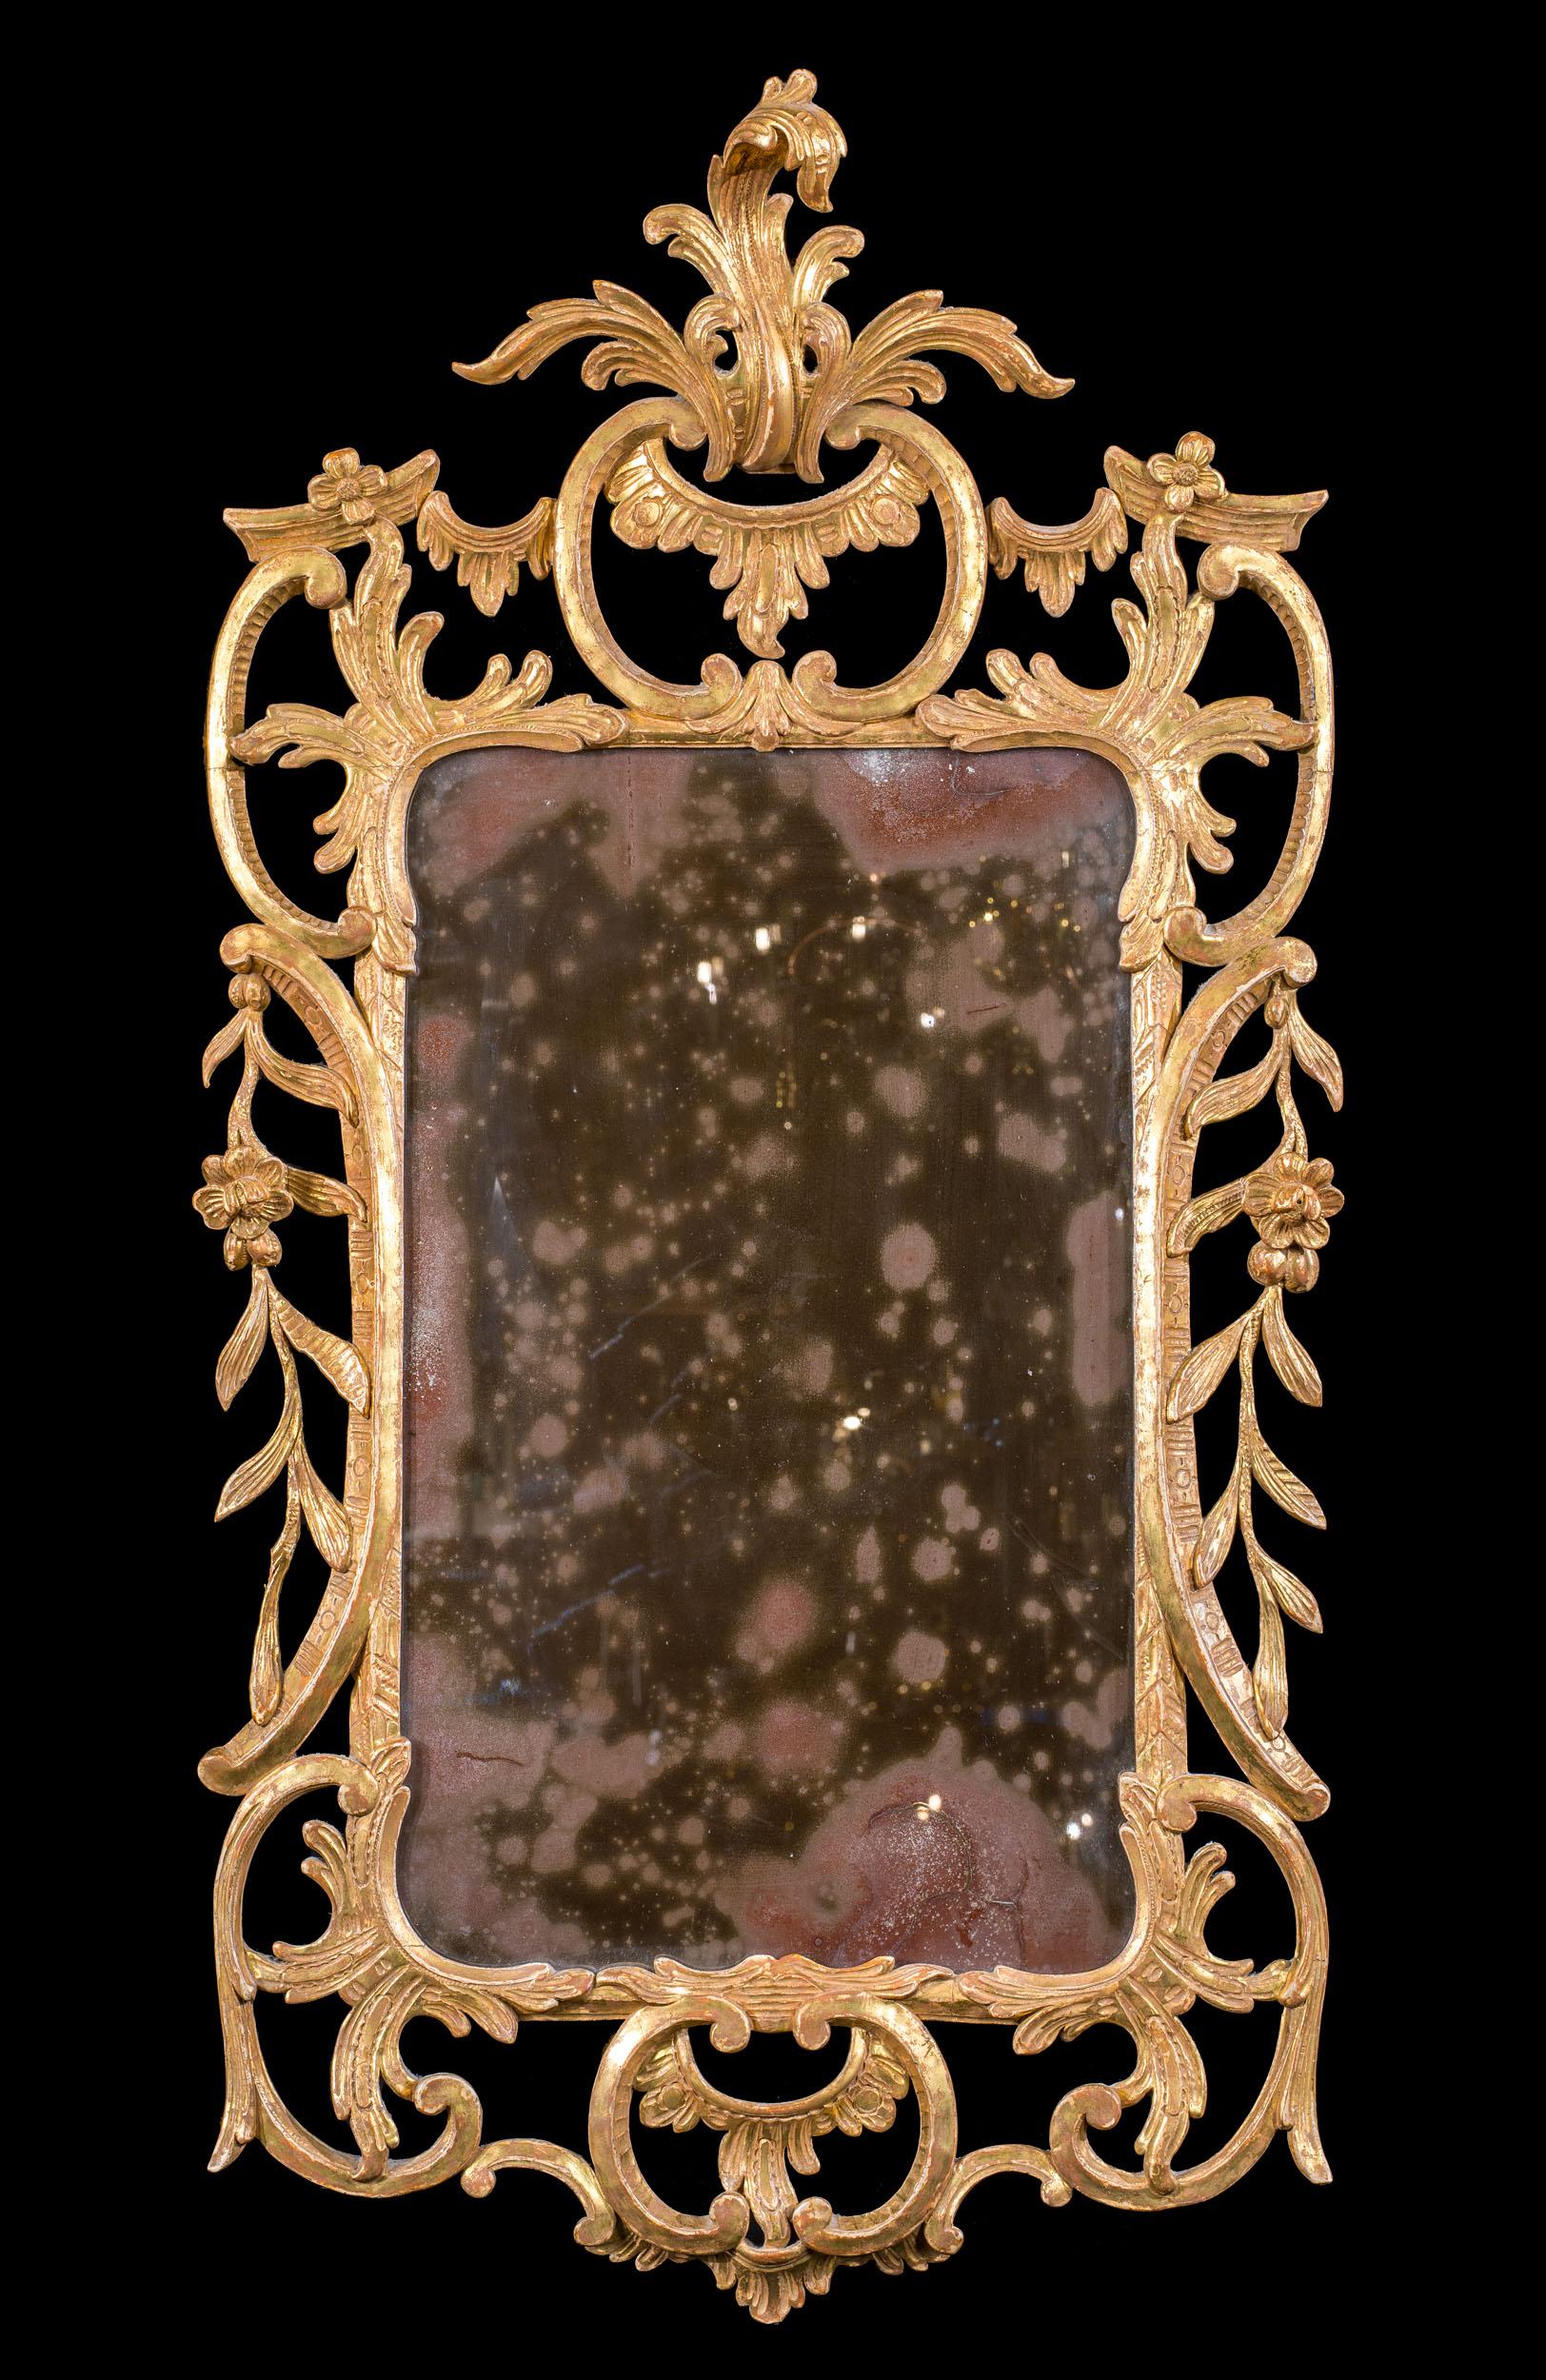 A fine gilt gesso George III wall mirror with delicate carving. The intricate frame has fine detailing throughout, including a well carved and delicate crest of foliate form and flowering vines and foliage within a framework of c scrolls.
English,